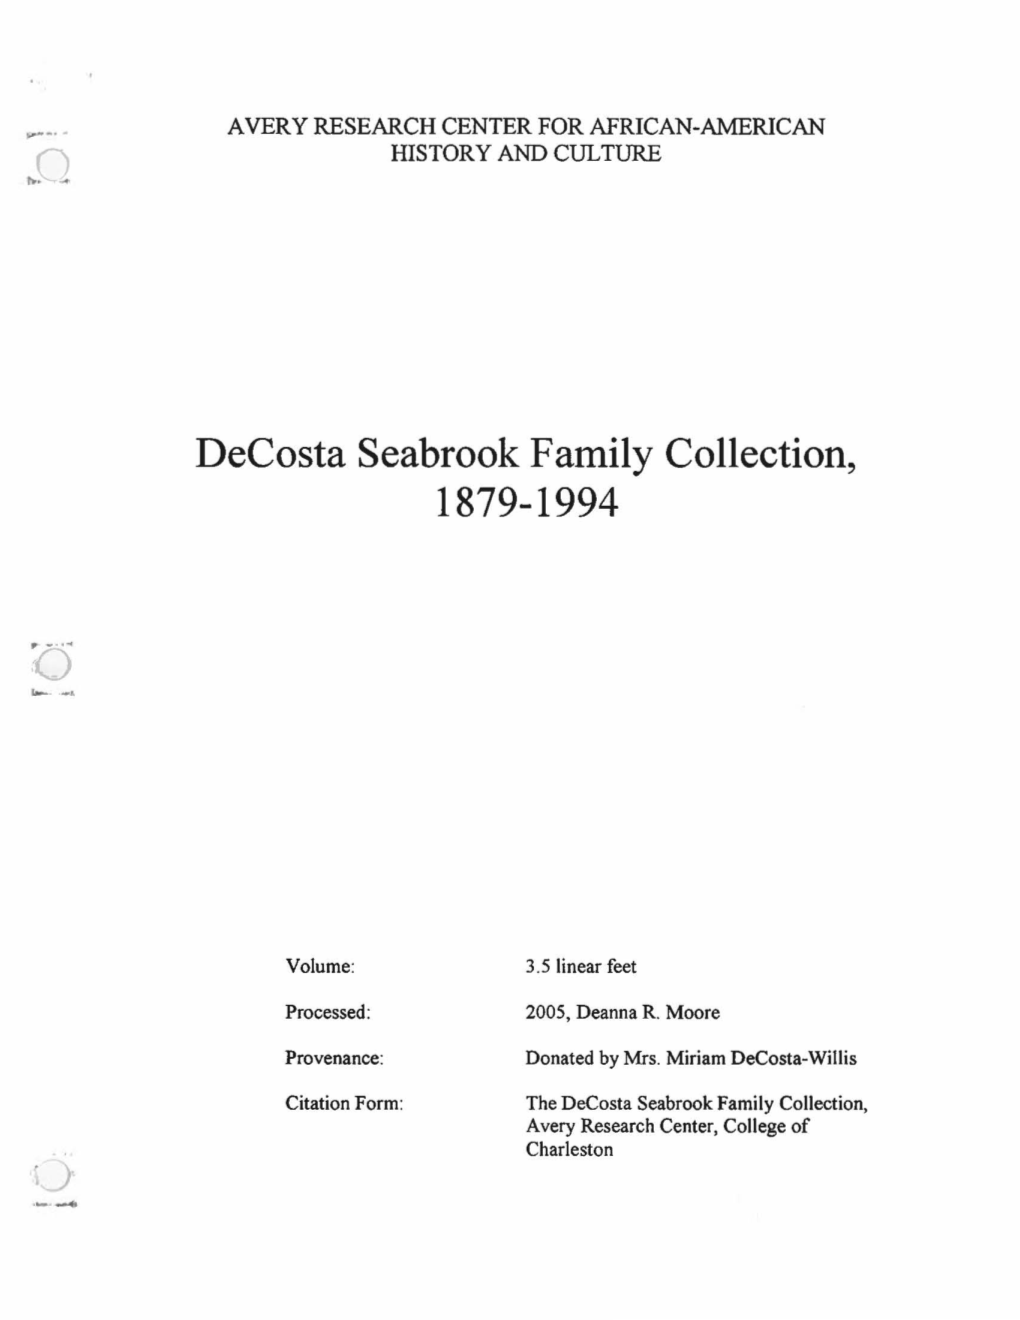 Decosta Seabrook Family Collection, 1879-1994